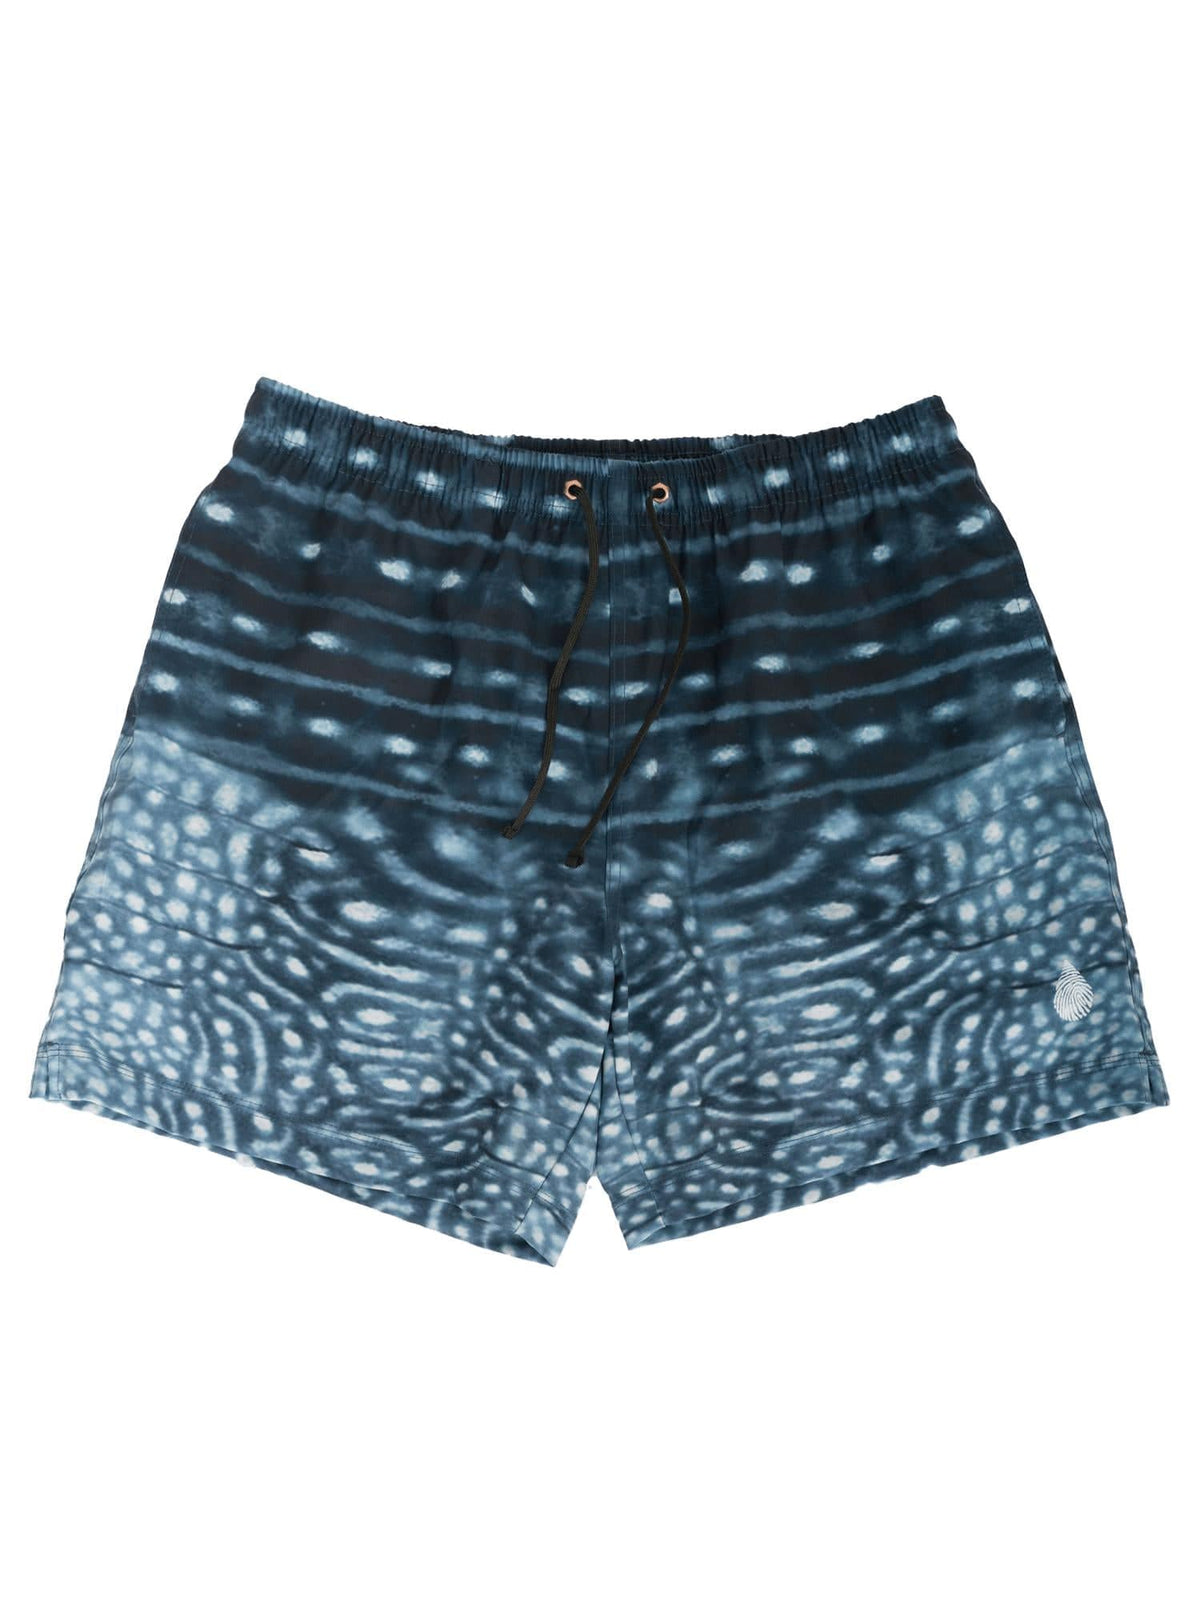 Whale Shark Warrior Best Day Ever Shorts